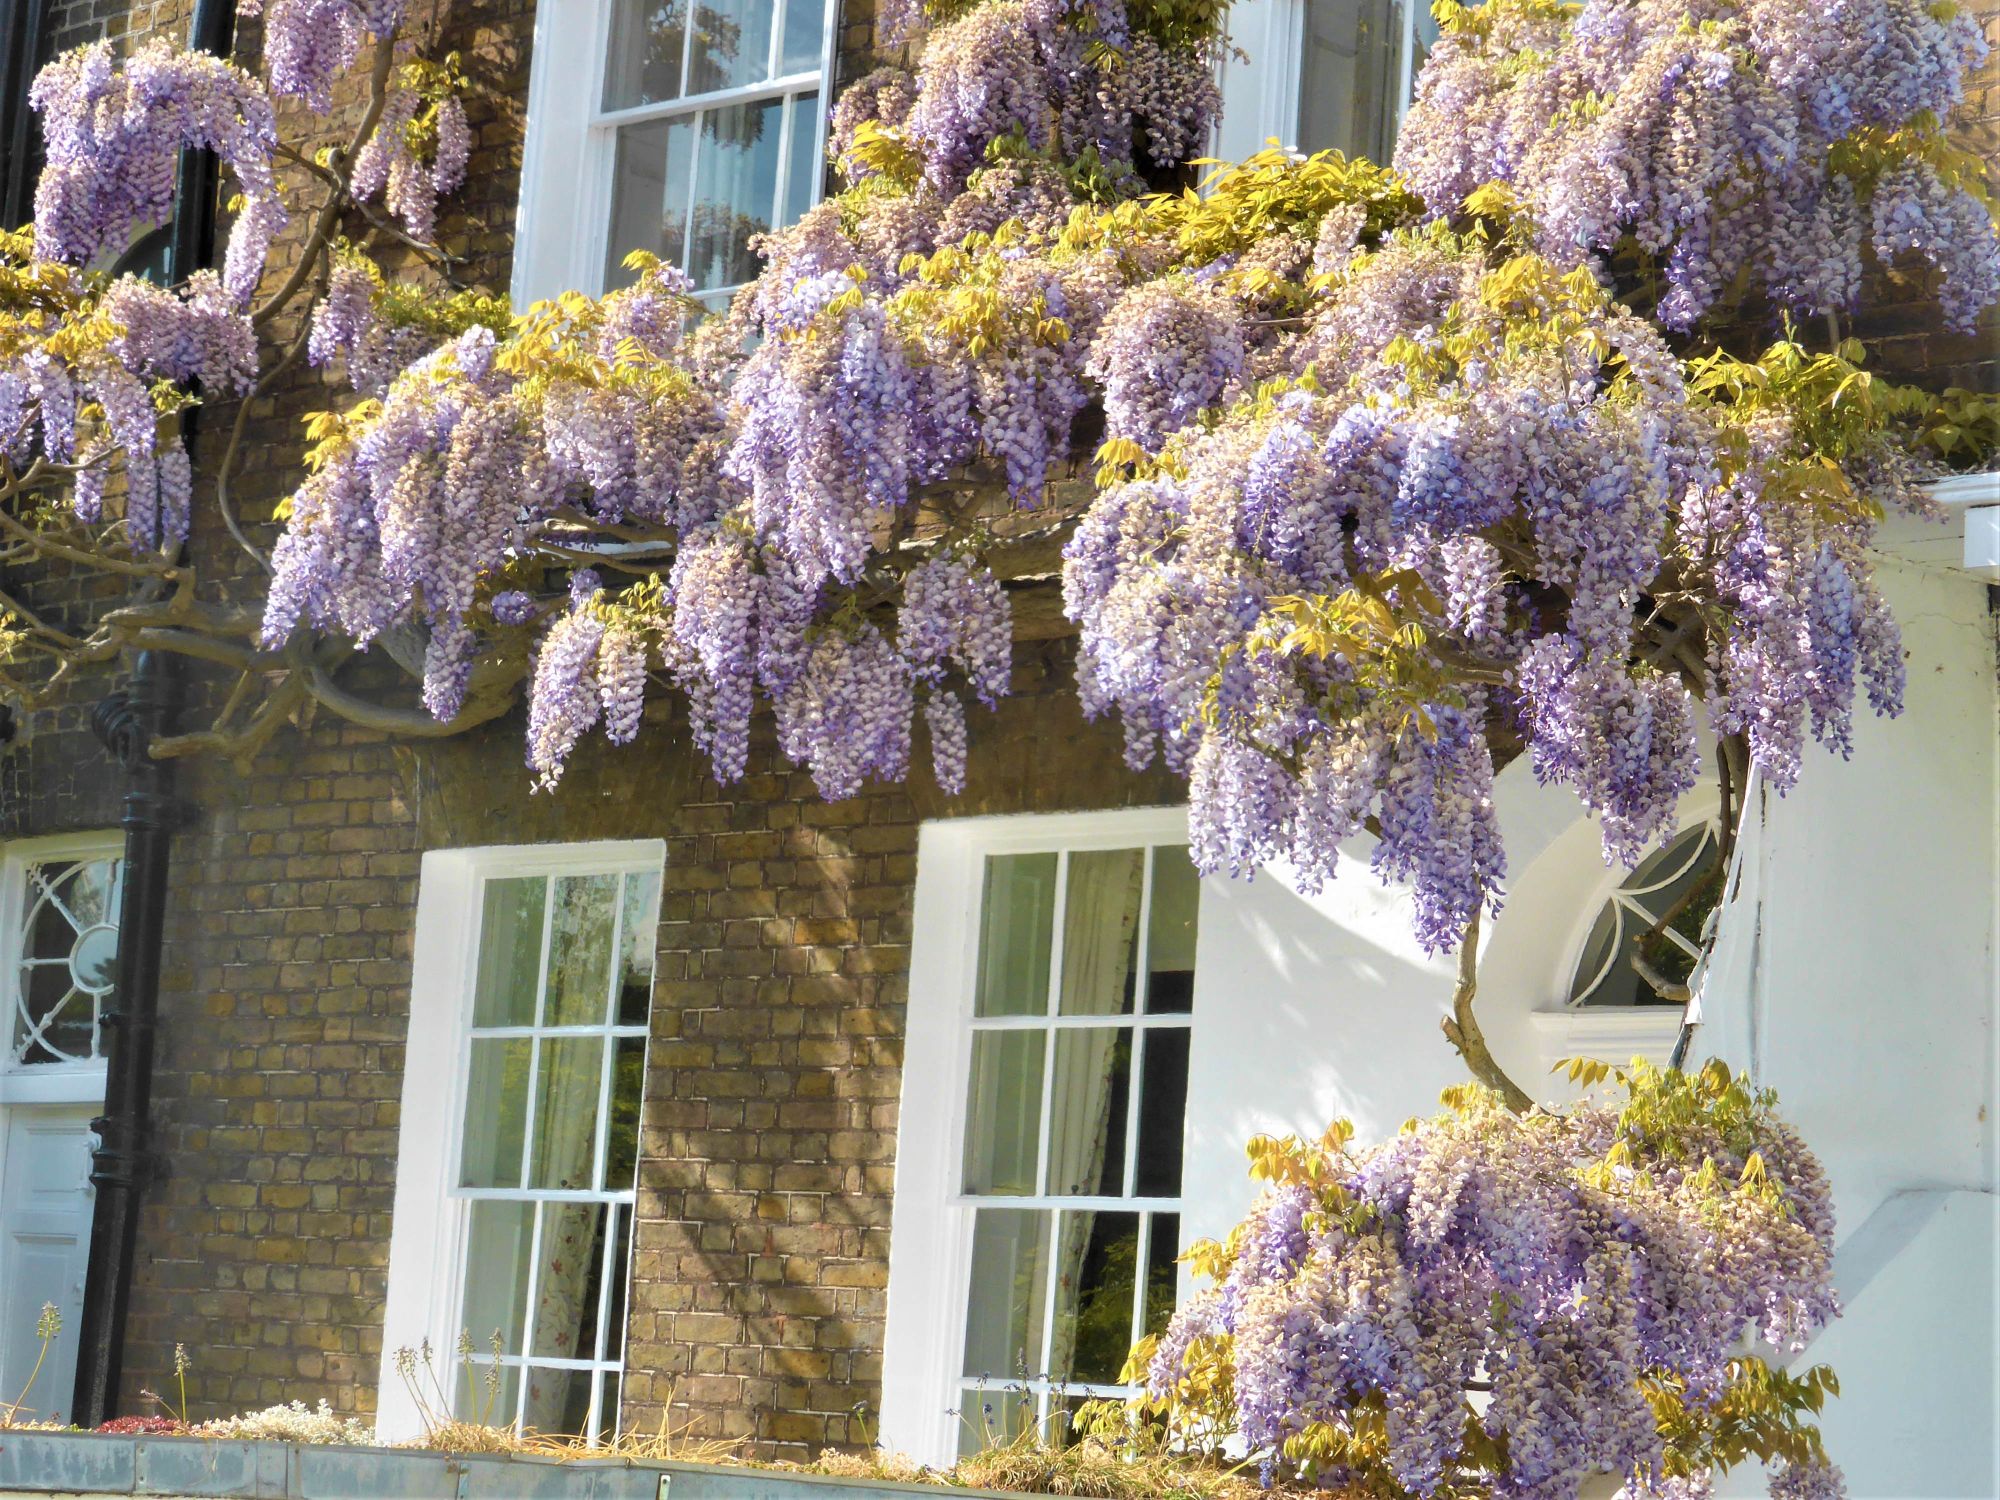 Town house with Wisteria